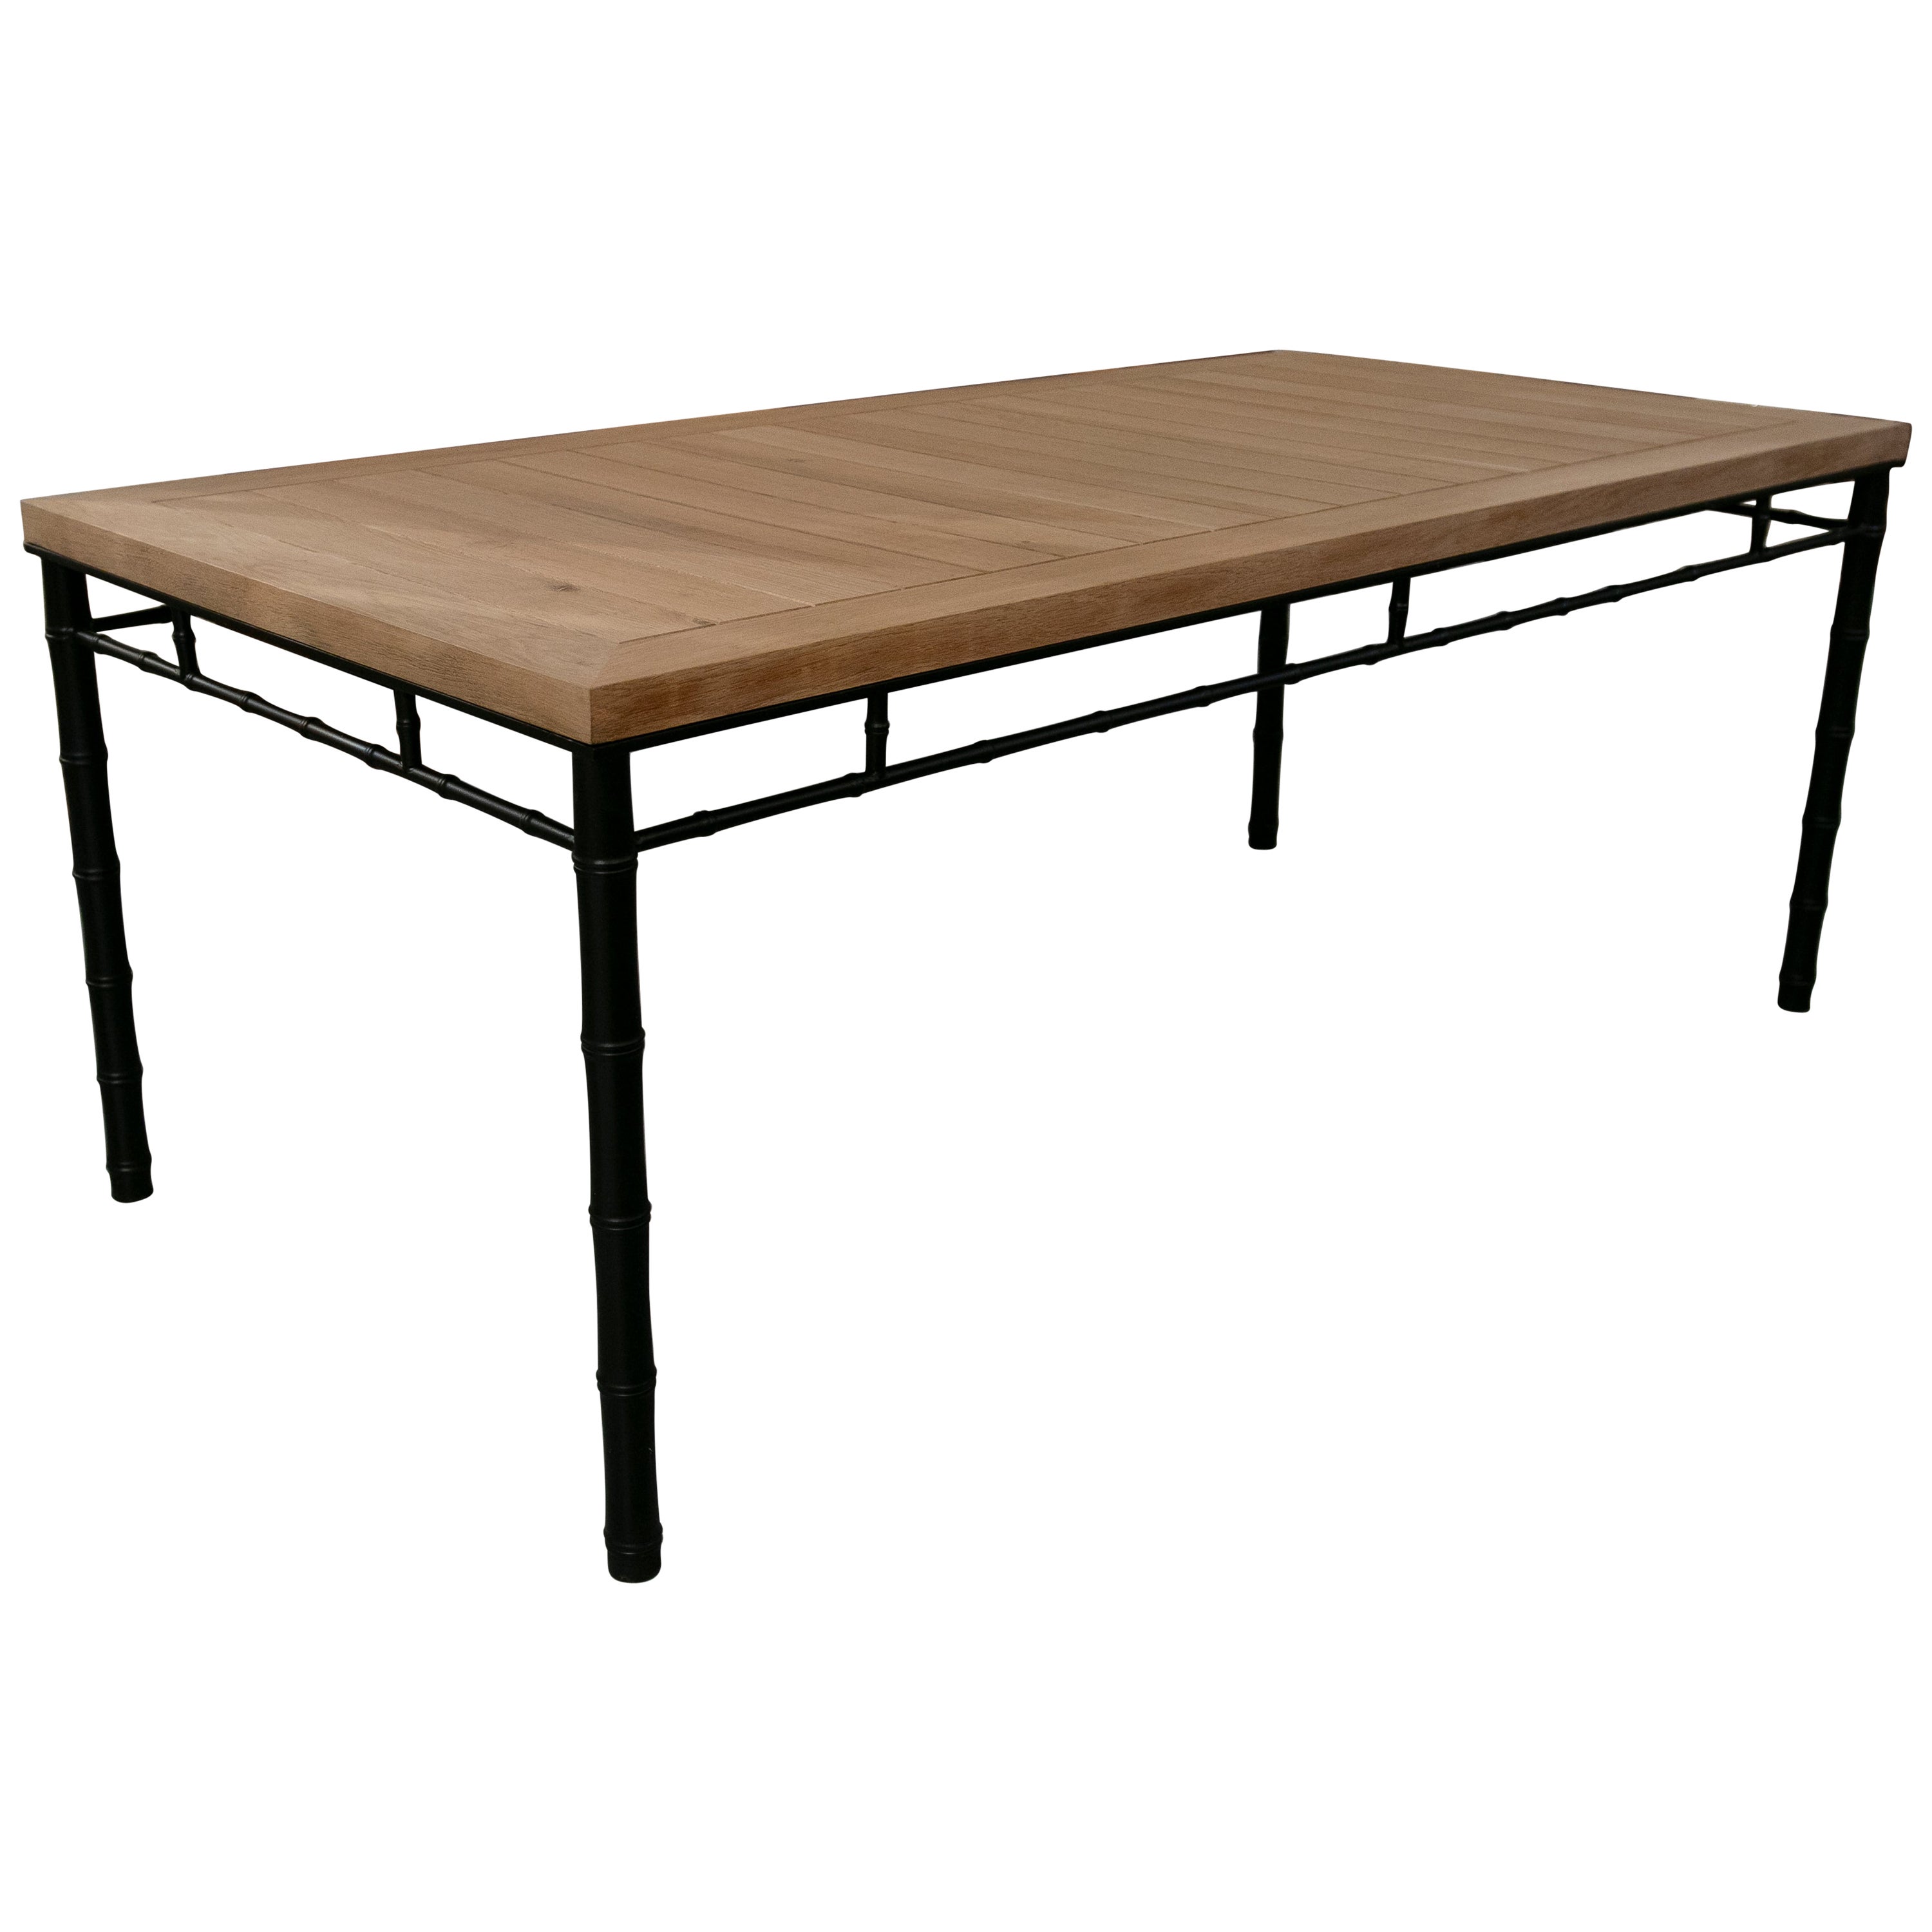 Table with Iron Base Imitating Bamboo with Wooden Top in its Original Colour. For Sale